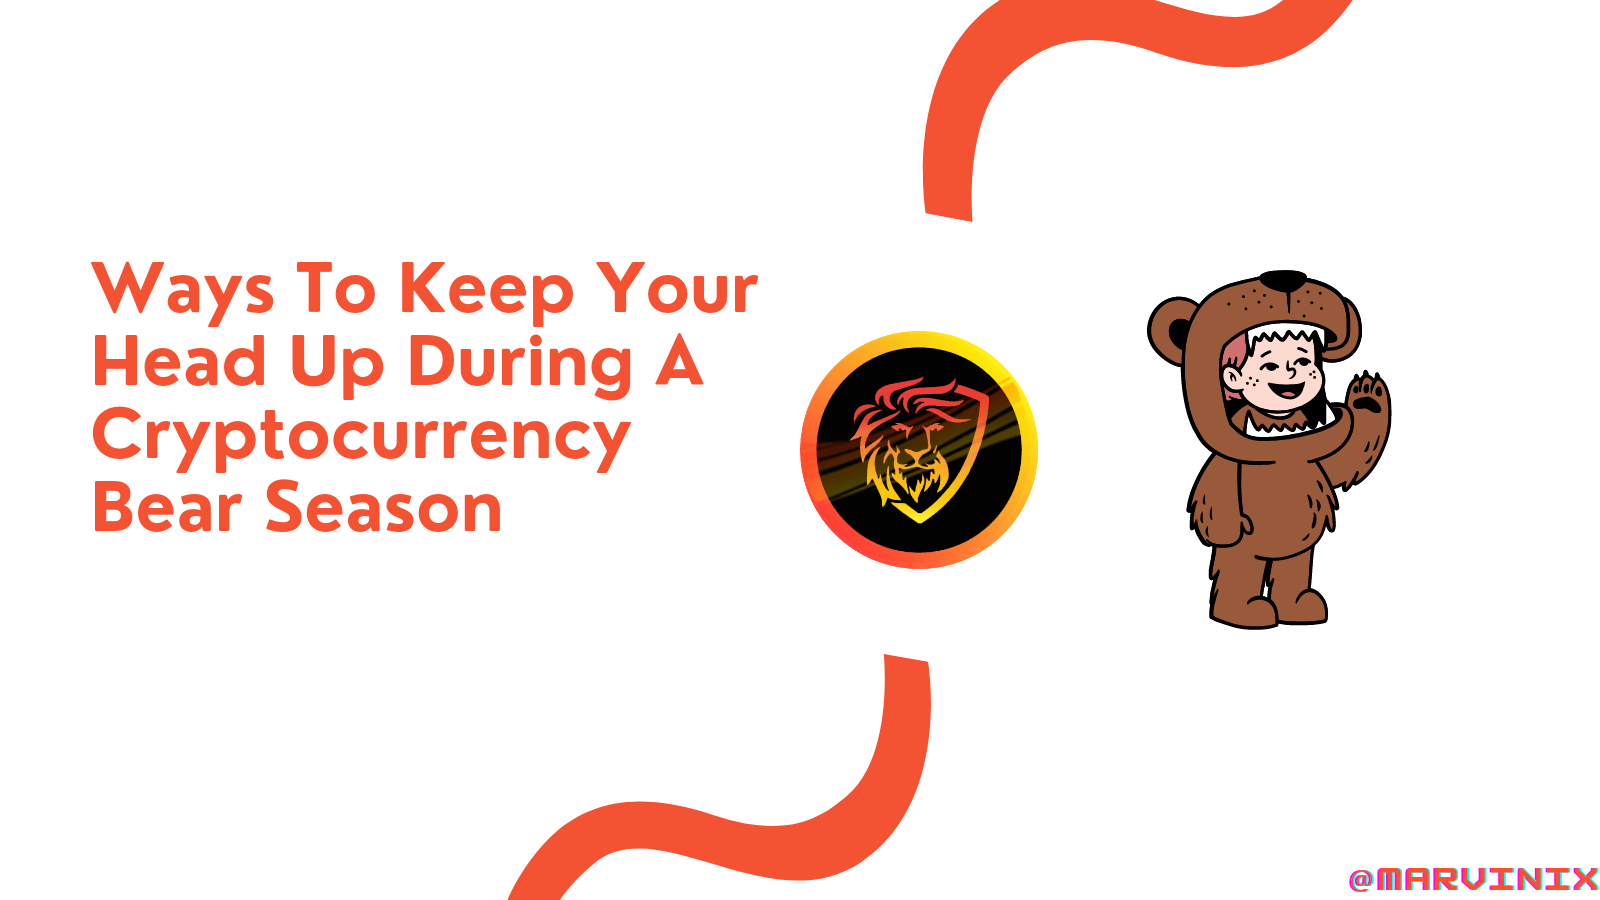 @marvinix/ways-to-keep-your-head-up-during-a-cryptocurrency-bear-season